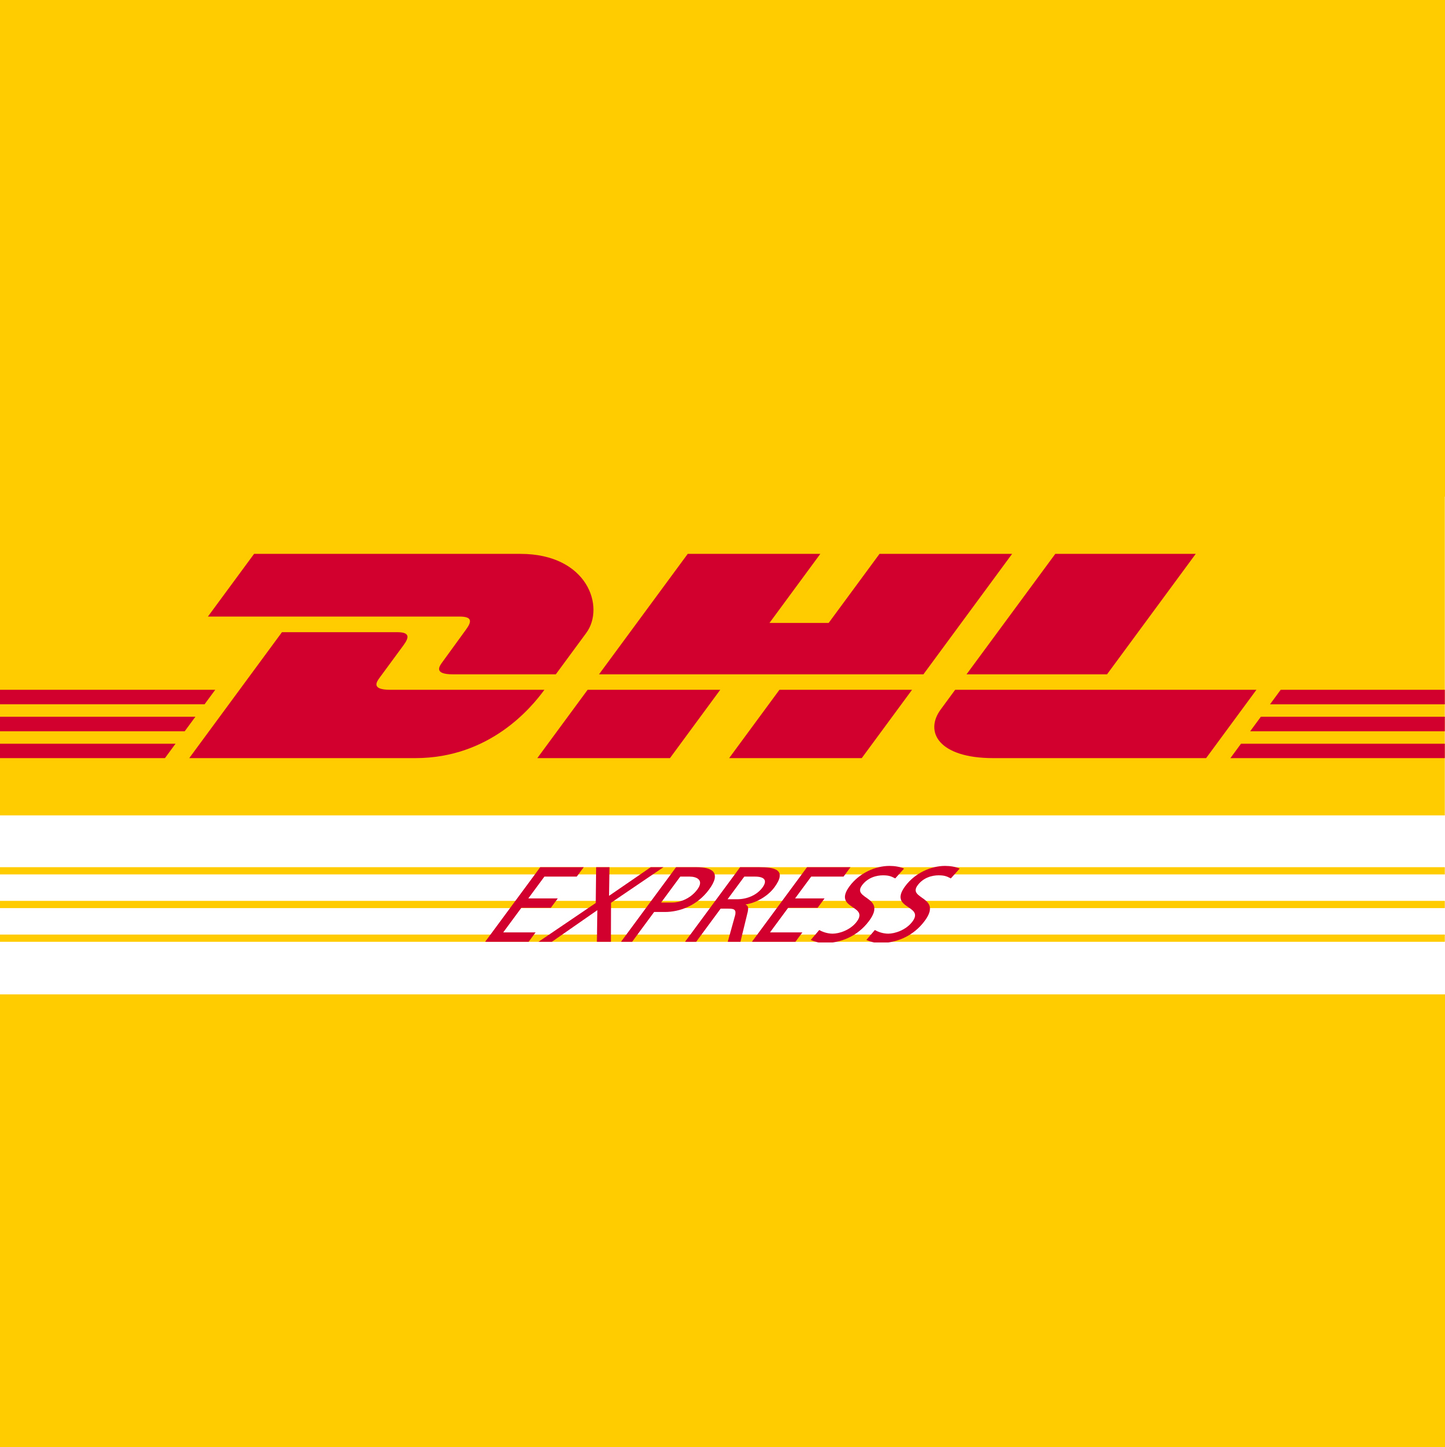 HUGE package DHL guaranteed 3-5 business days shipping upgrade